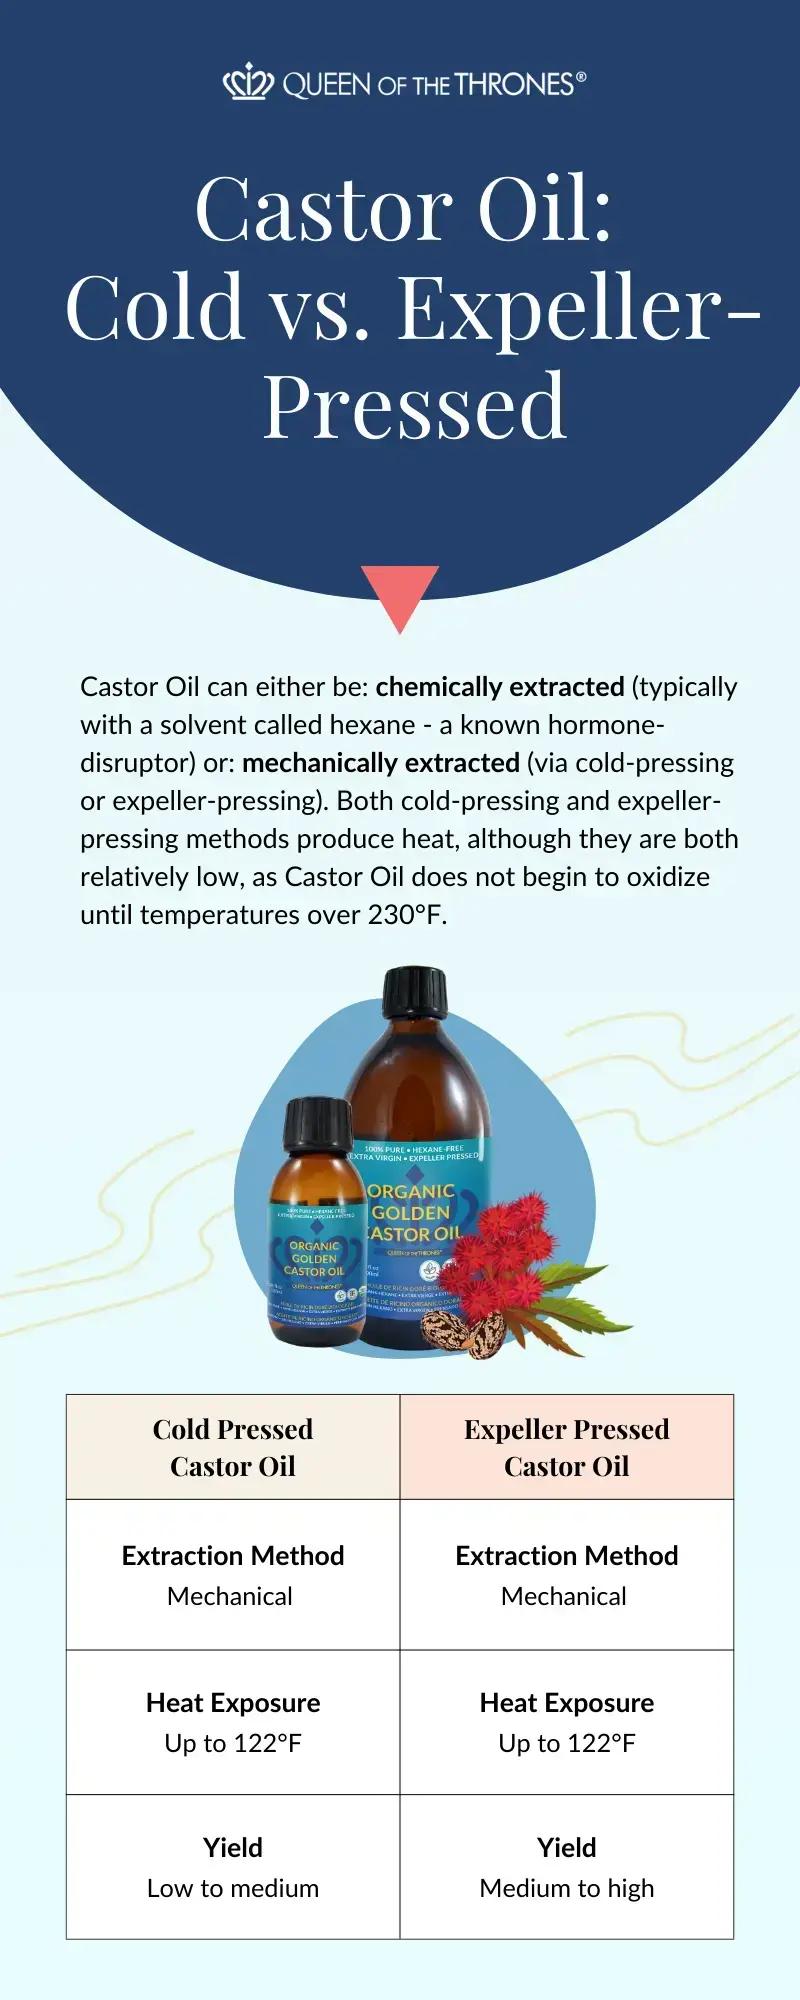 Queen of the Thrones Castor oil cold vs expeller pressed